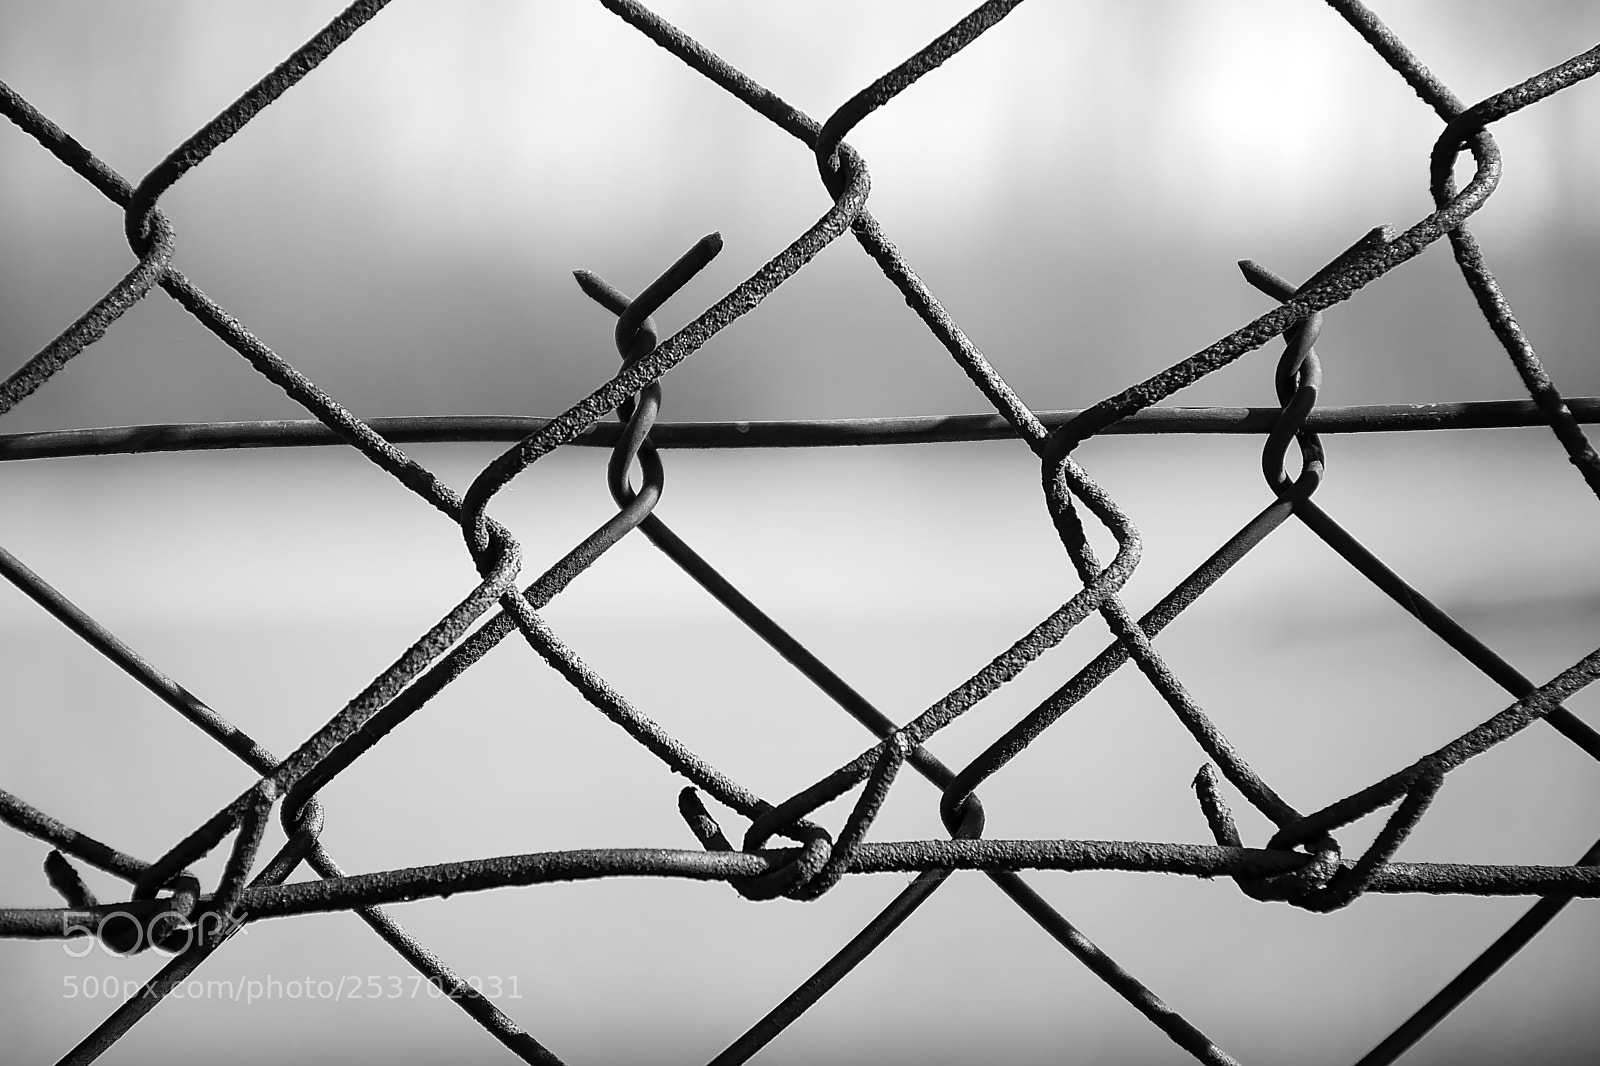 Nikon D5300 sample photo. Rusty wire fence in photography